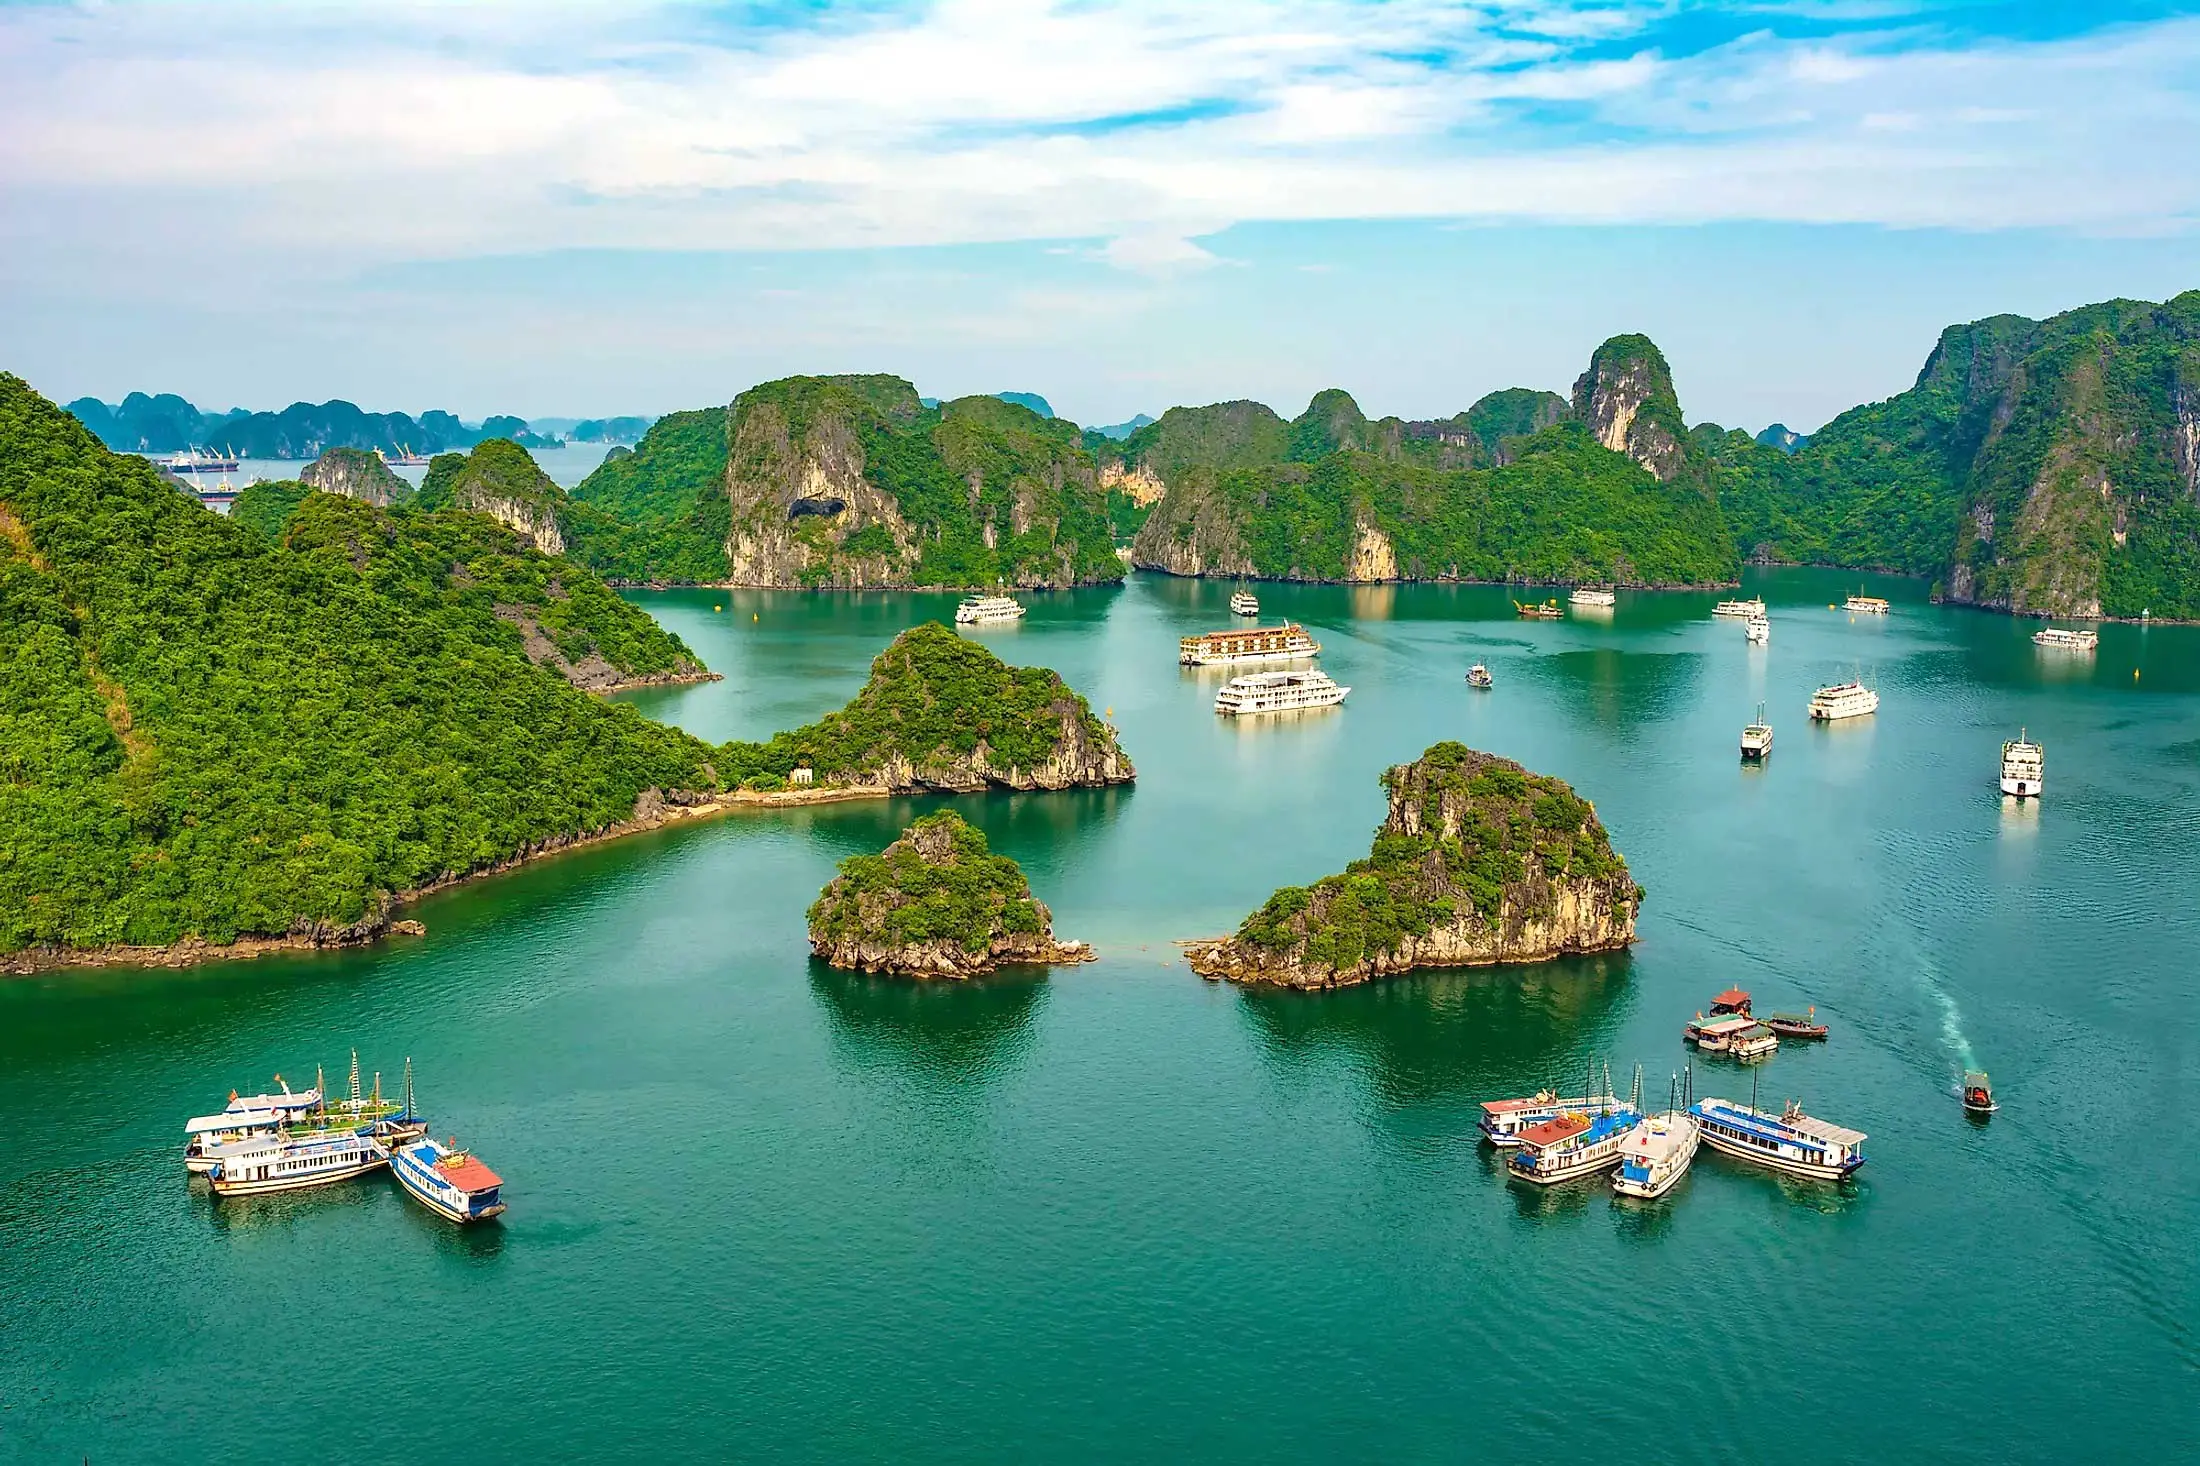 A scenic view of Halong Bay with limestone karsts and blue water in October